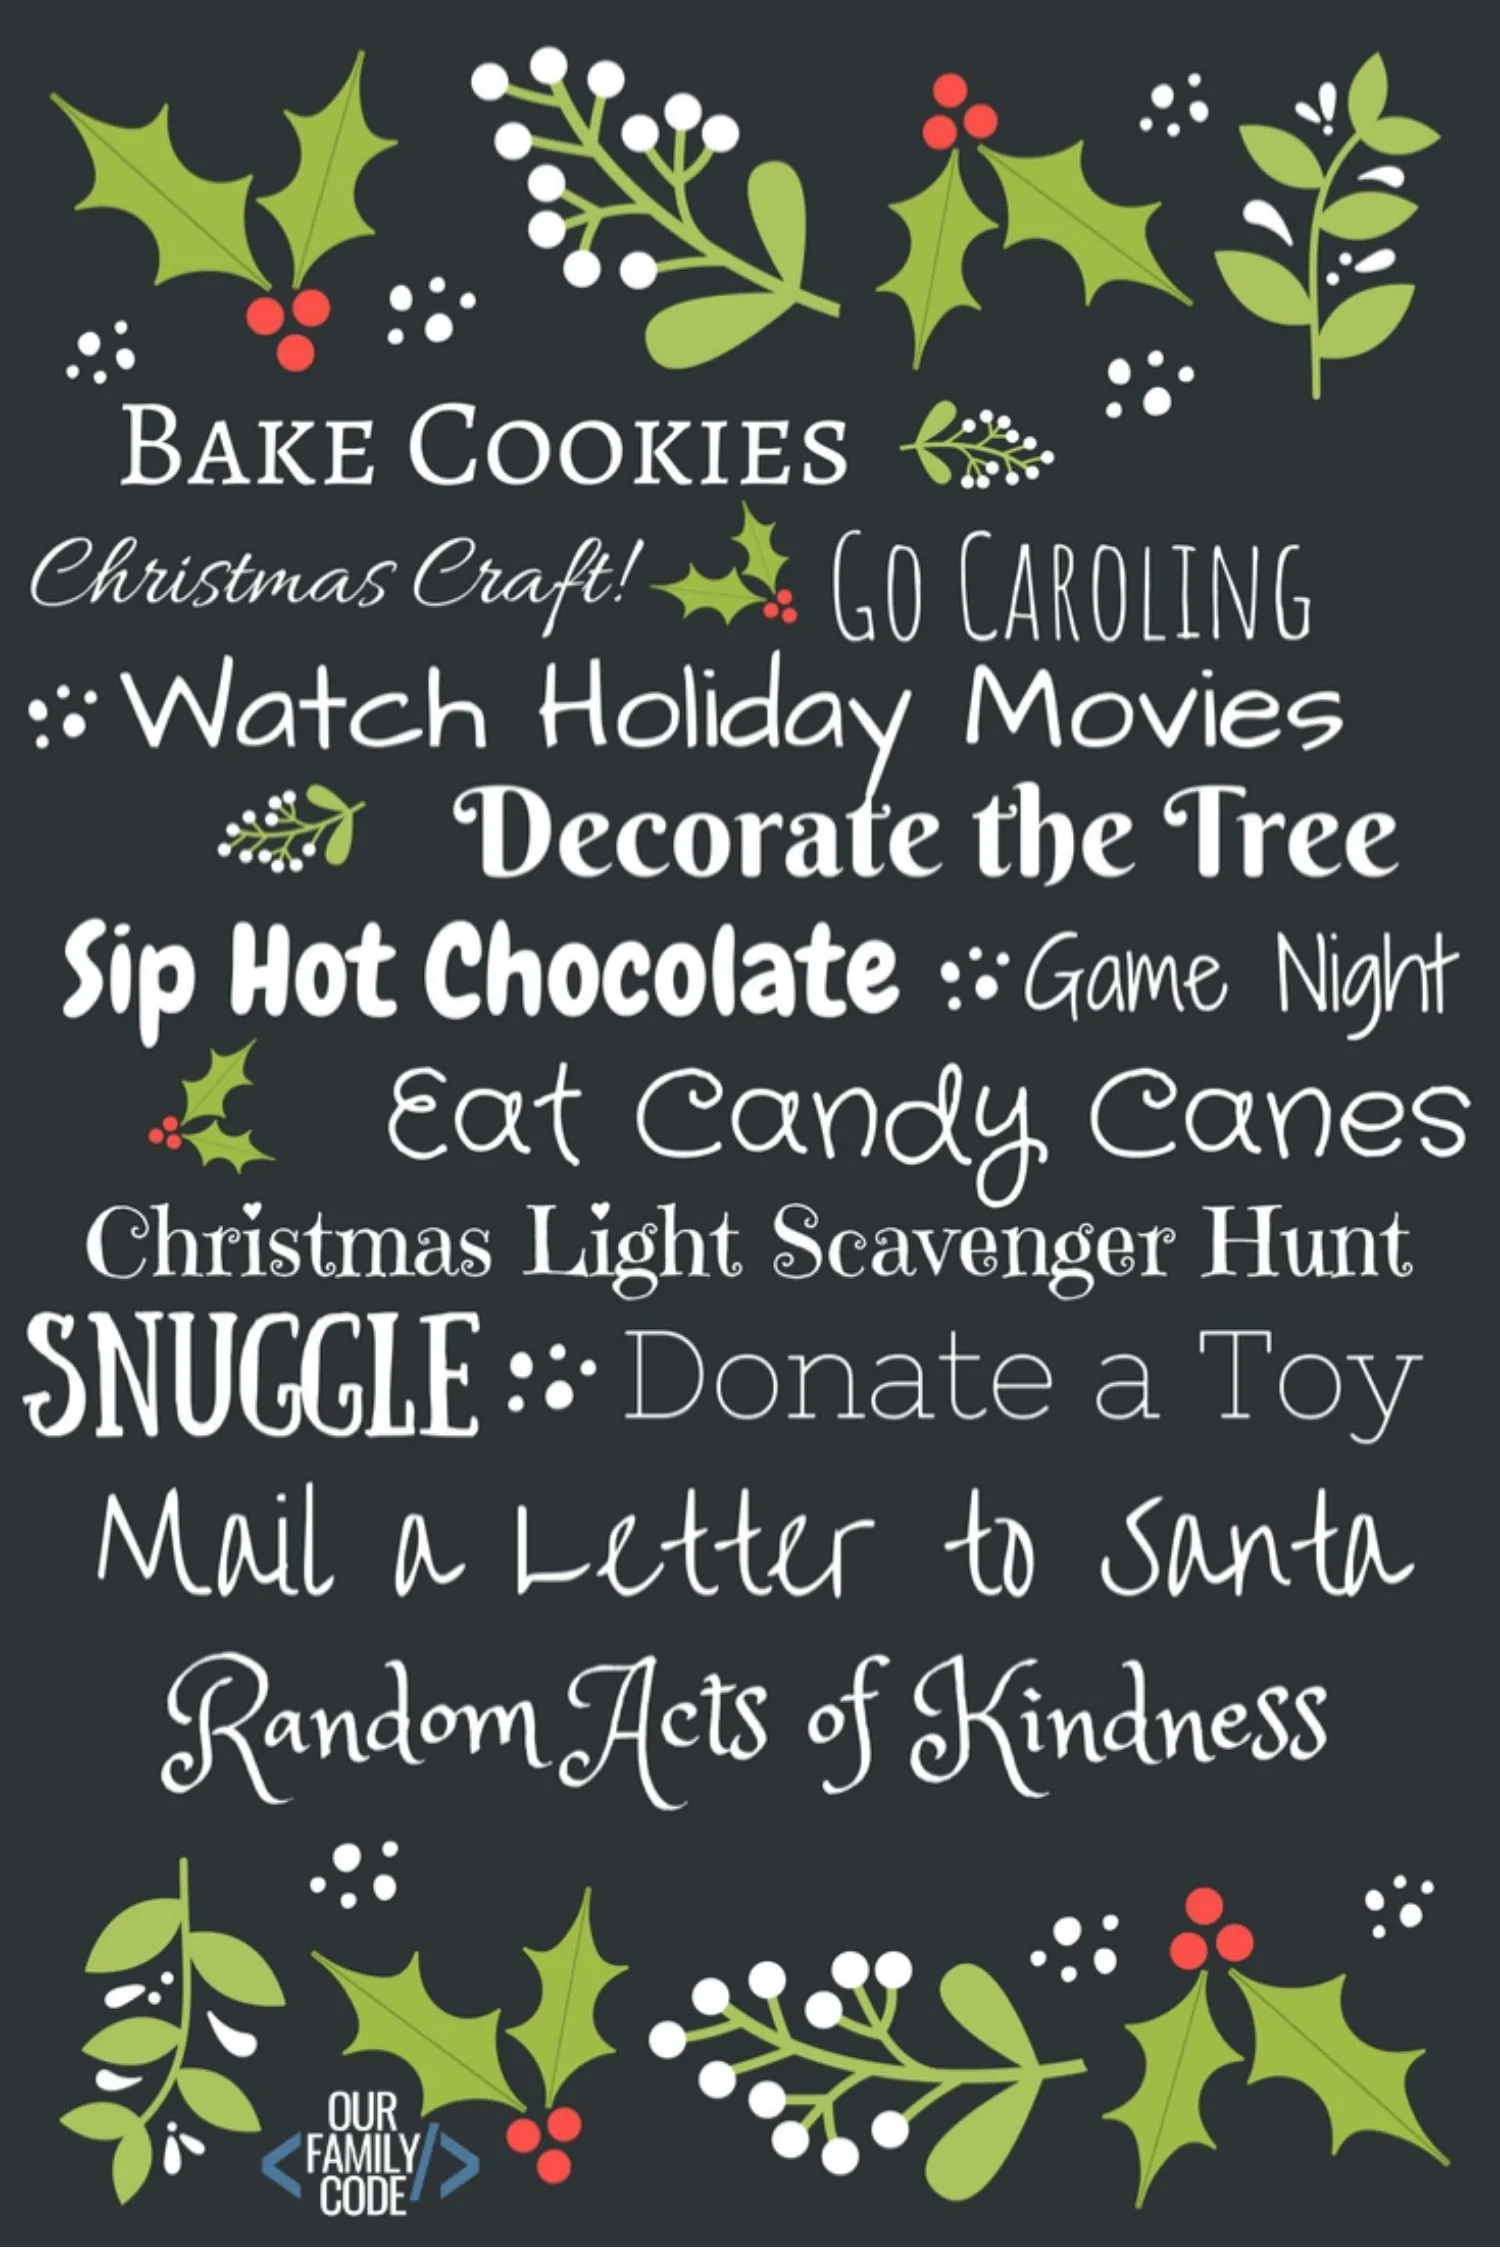 A picture of a family Christmas bucket list.